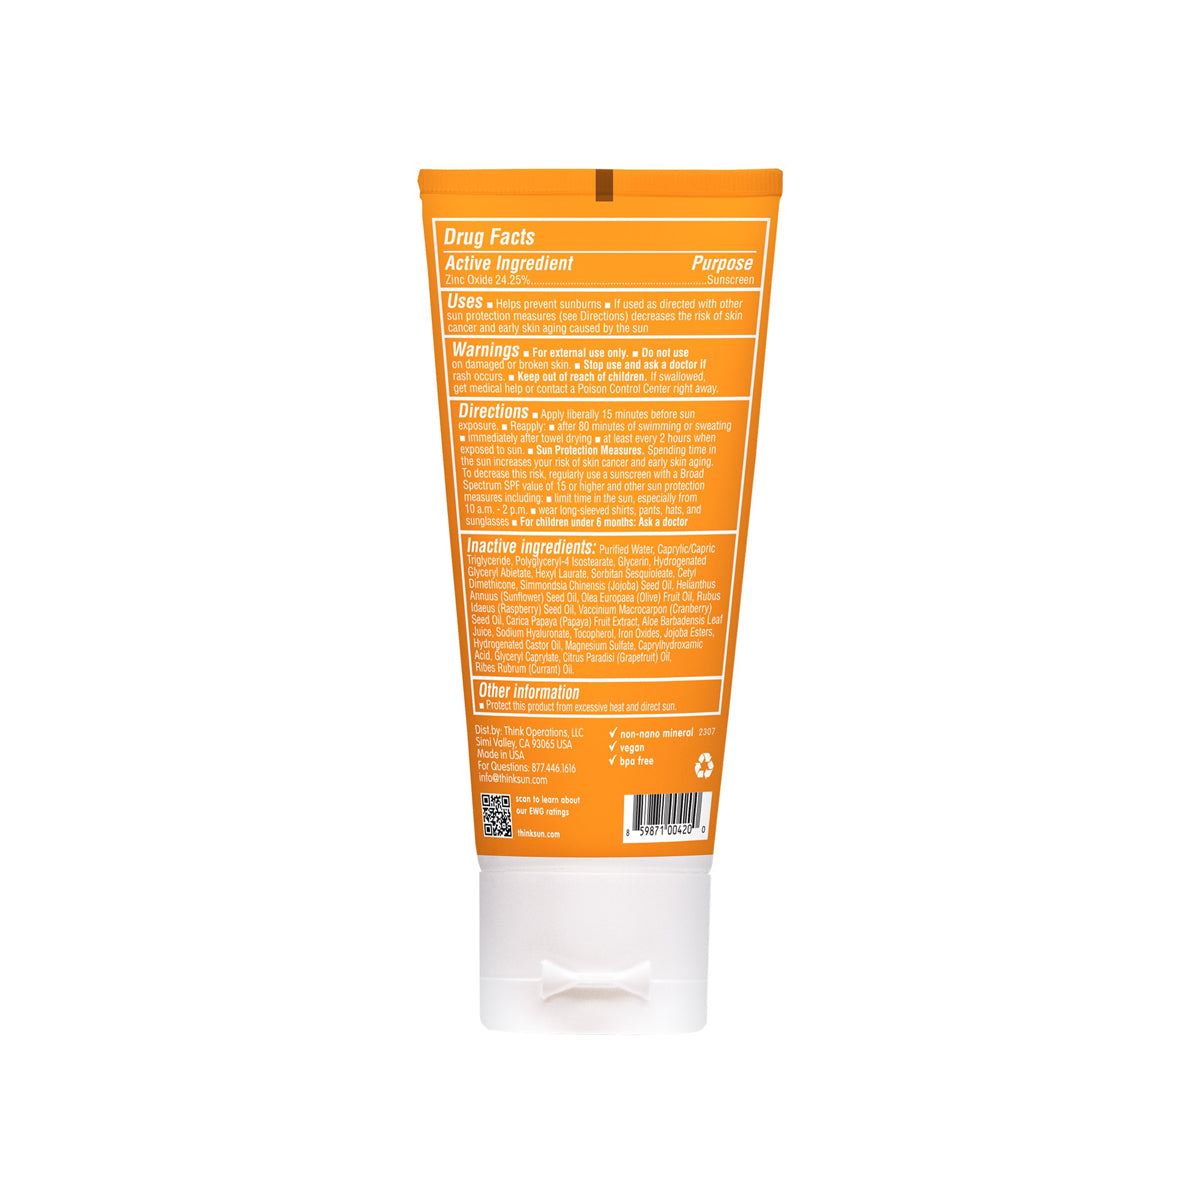 Back view of ThinkDaily Tinted Face 30 SPF Sunscreen tube, displaying detailed product information, usage directions, and ingredients.